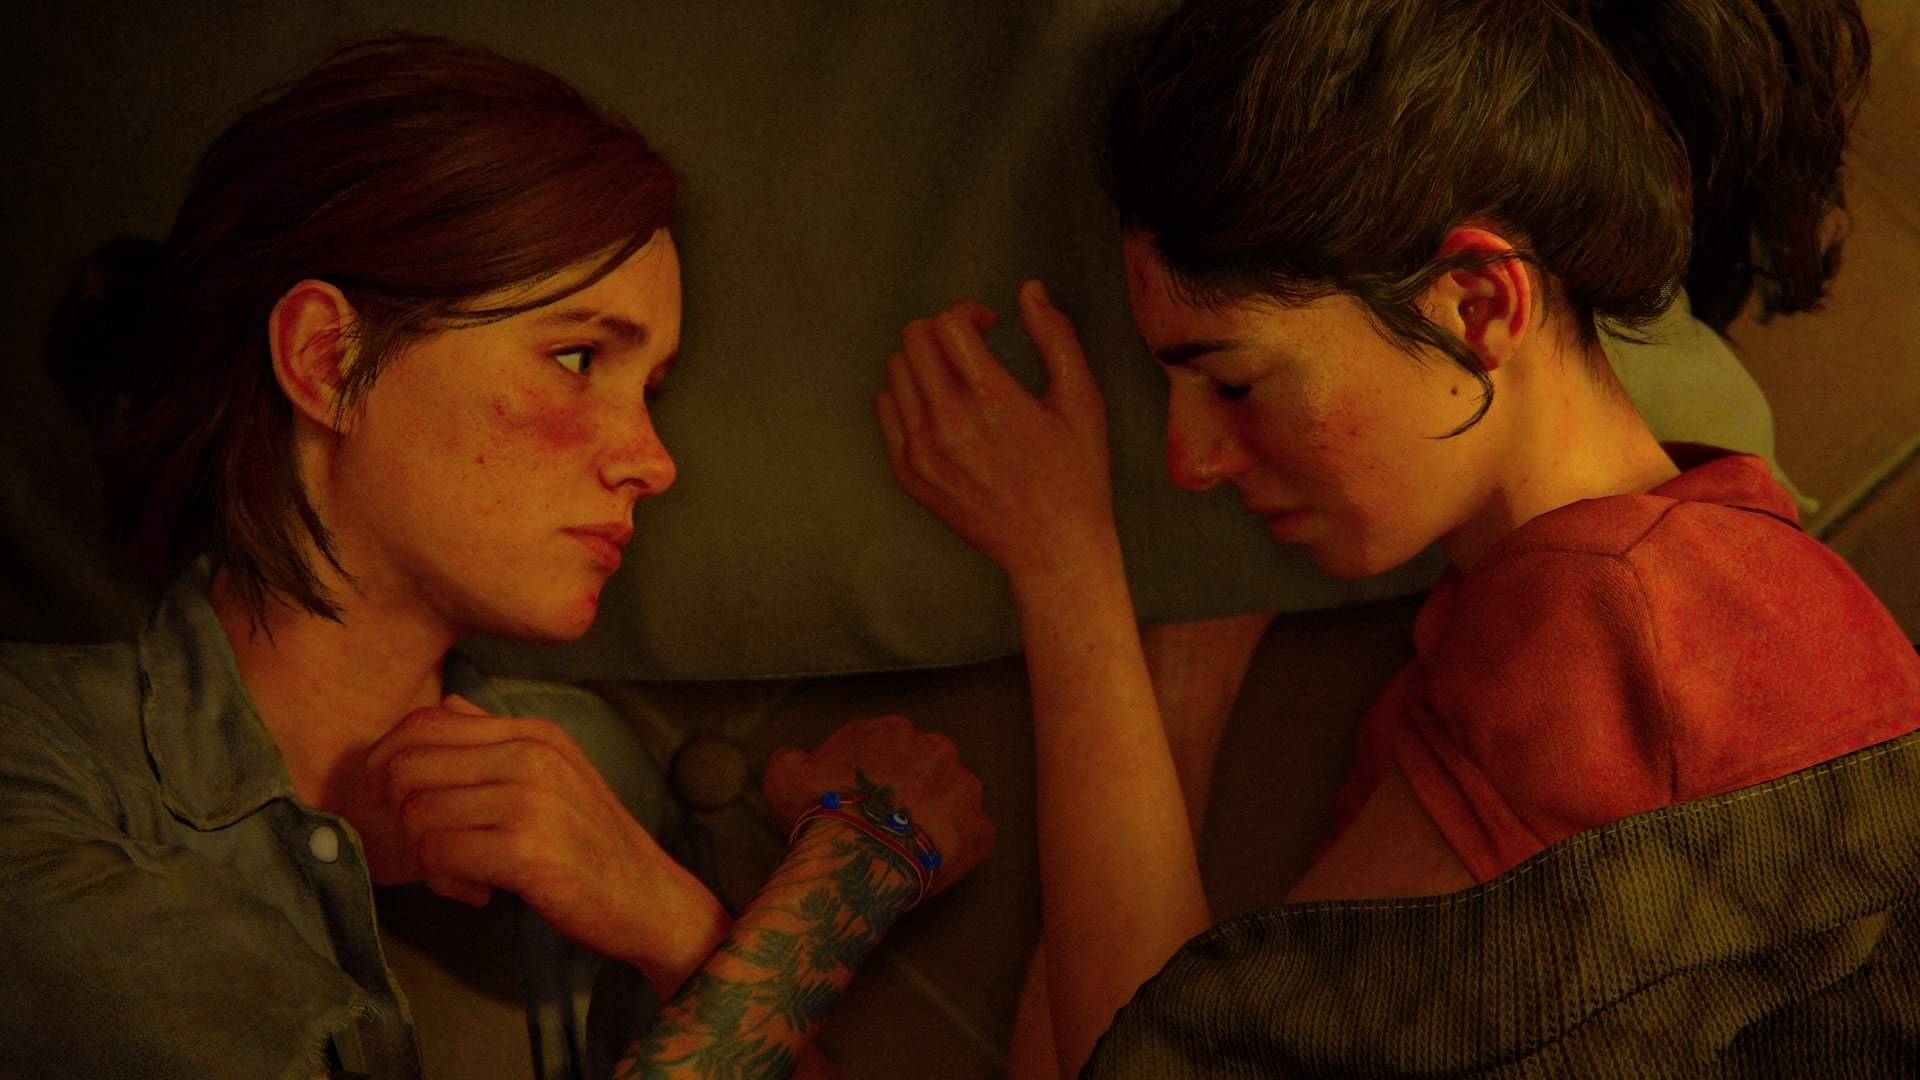 The Last of Us Part II: the blockbuster game breaking LGBTQ+ barriers, Games